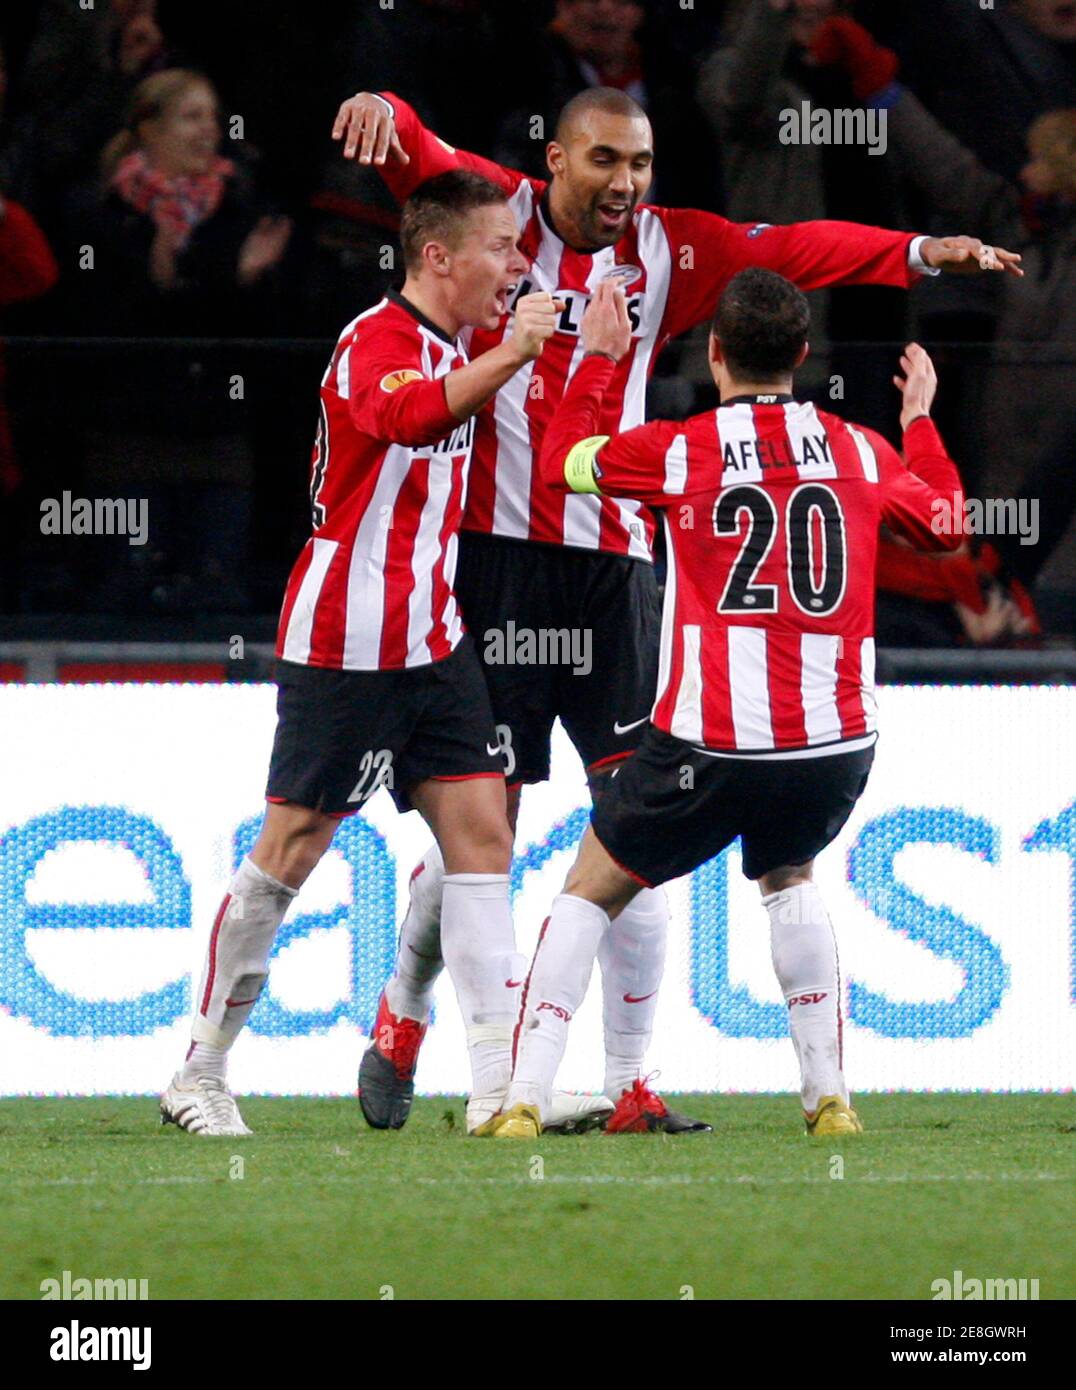 PSV Eindhoven's Orlando Engelaar (C) celebrates with team mates after scoring during their Europa League soccer match against AC Sparta Prague at the Phillips stadium in Eindhoven December 3, 2009.    REUTERS/Jerry Lampen (NETHERLANDS SPORT SOCCER) Stock Photo